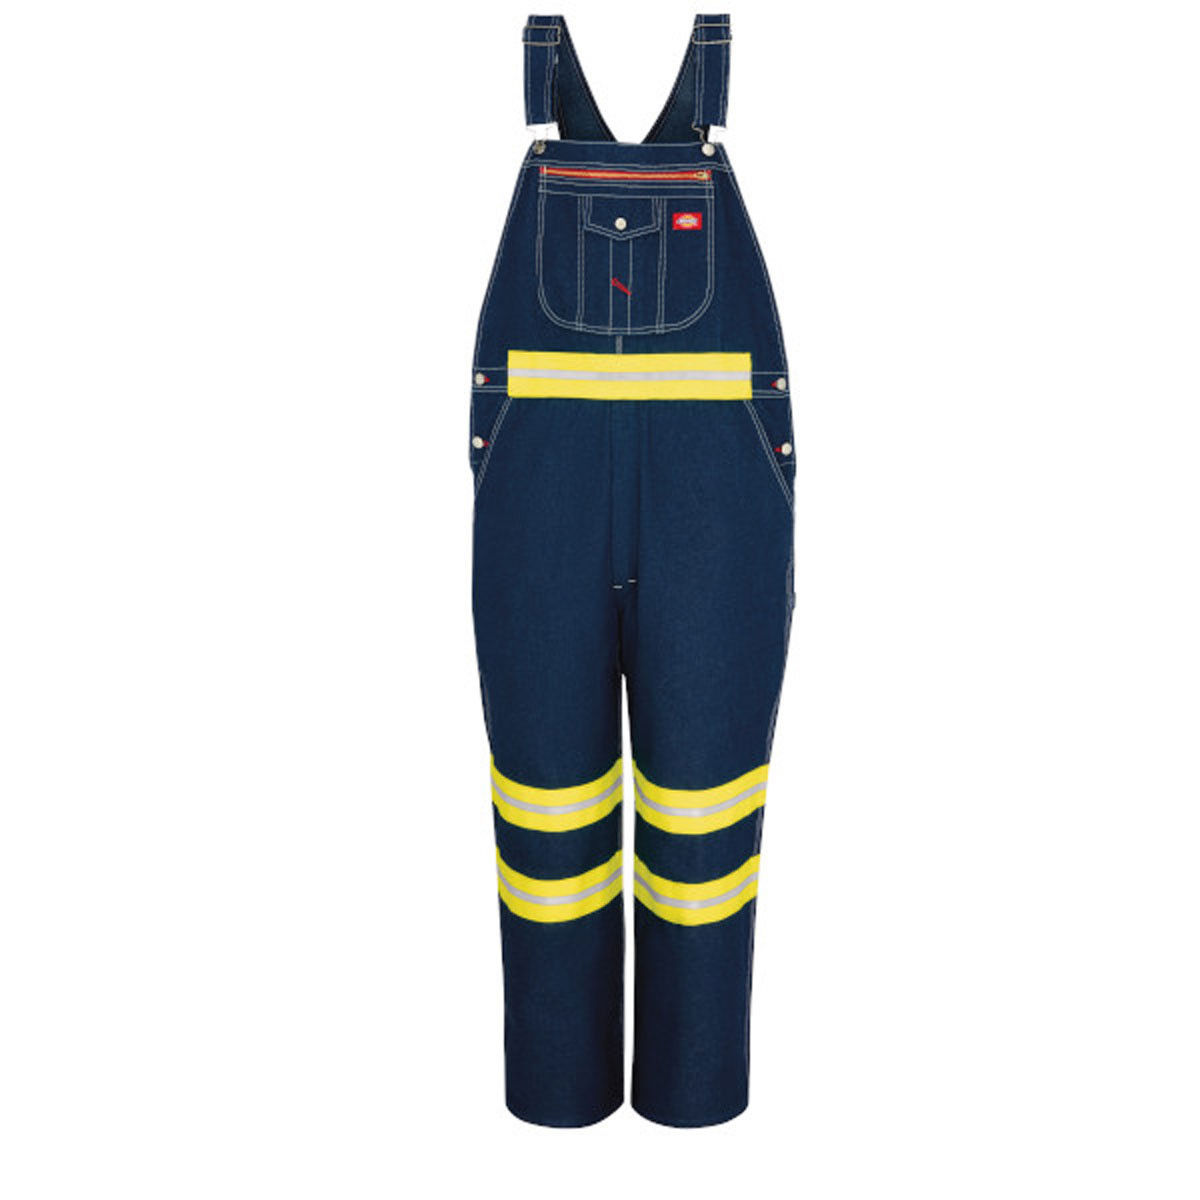 Do the Dickies overalls meet the ANSI standards for visibility?